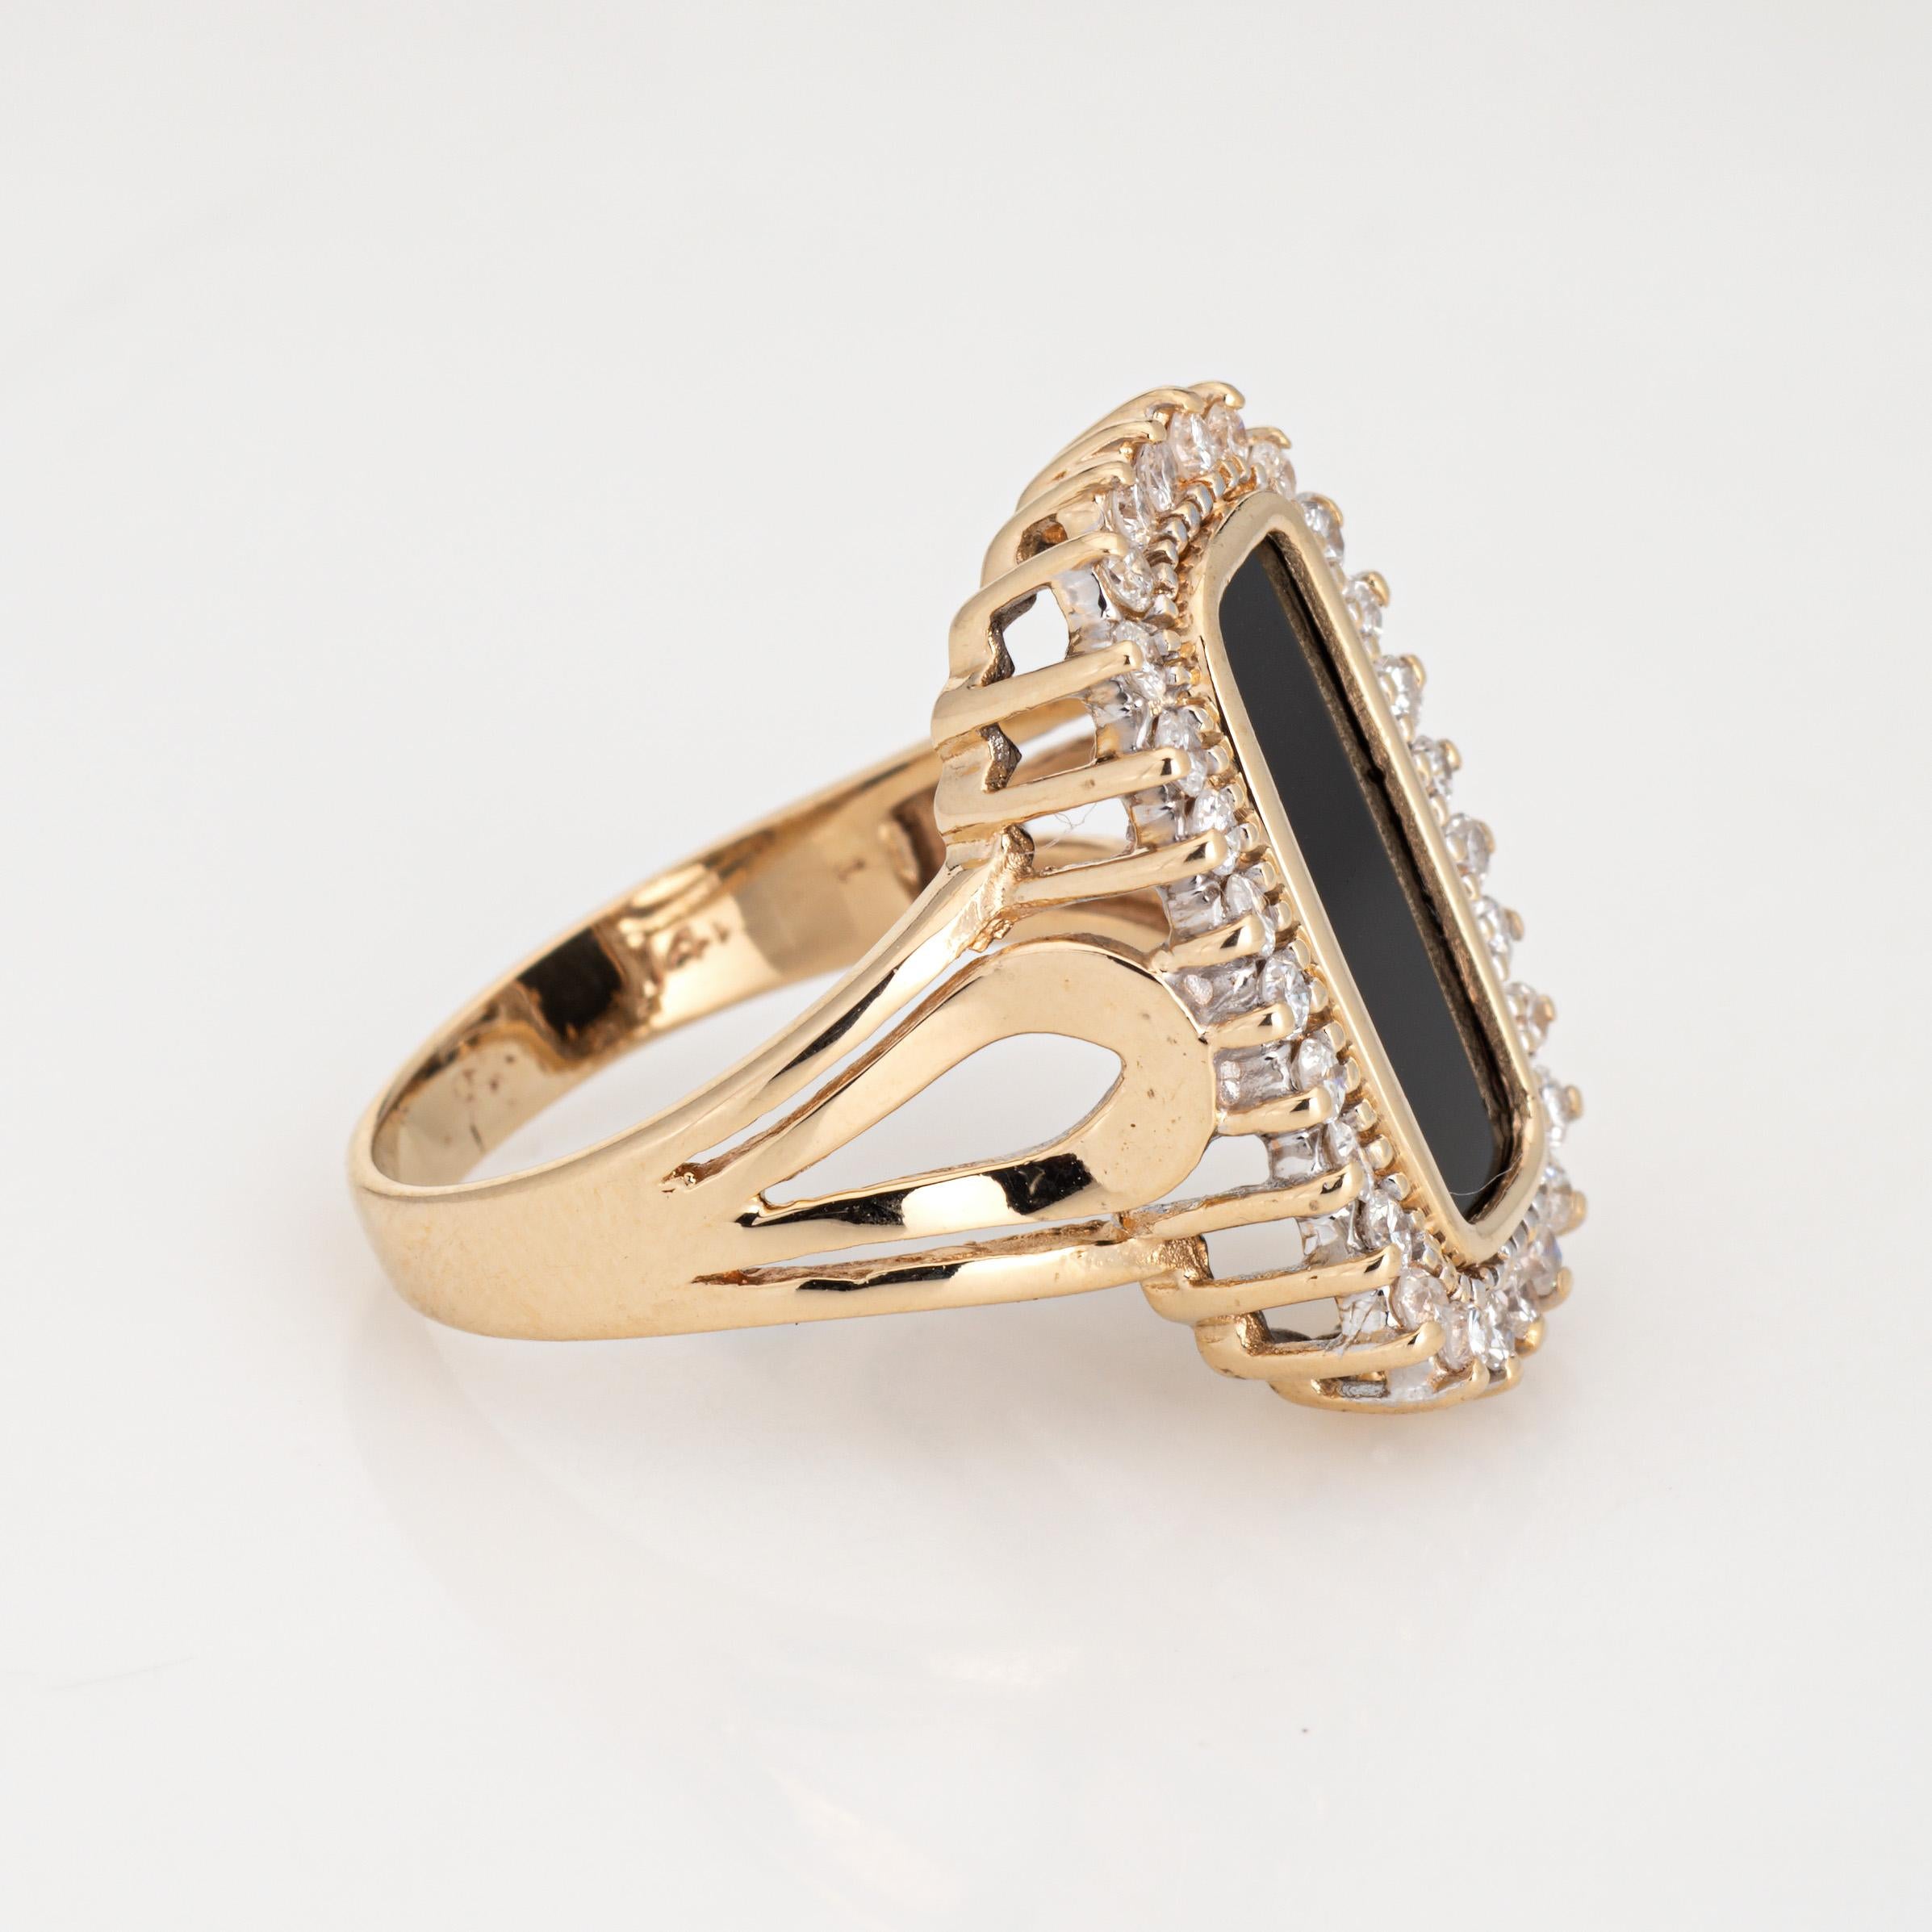 Modern Onyx Diamond Ring Vintage 14k Yellow Gold Sz 7.75 Elonged Square Cocktail  For Sale